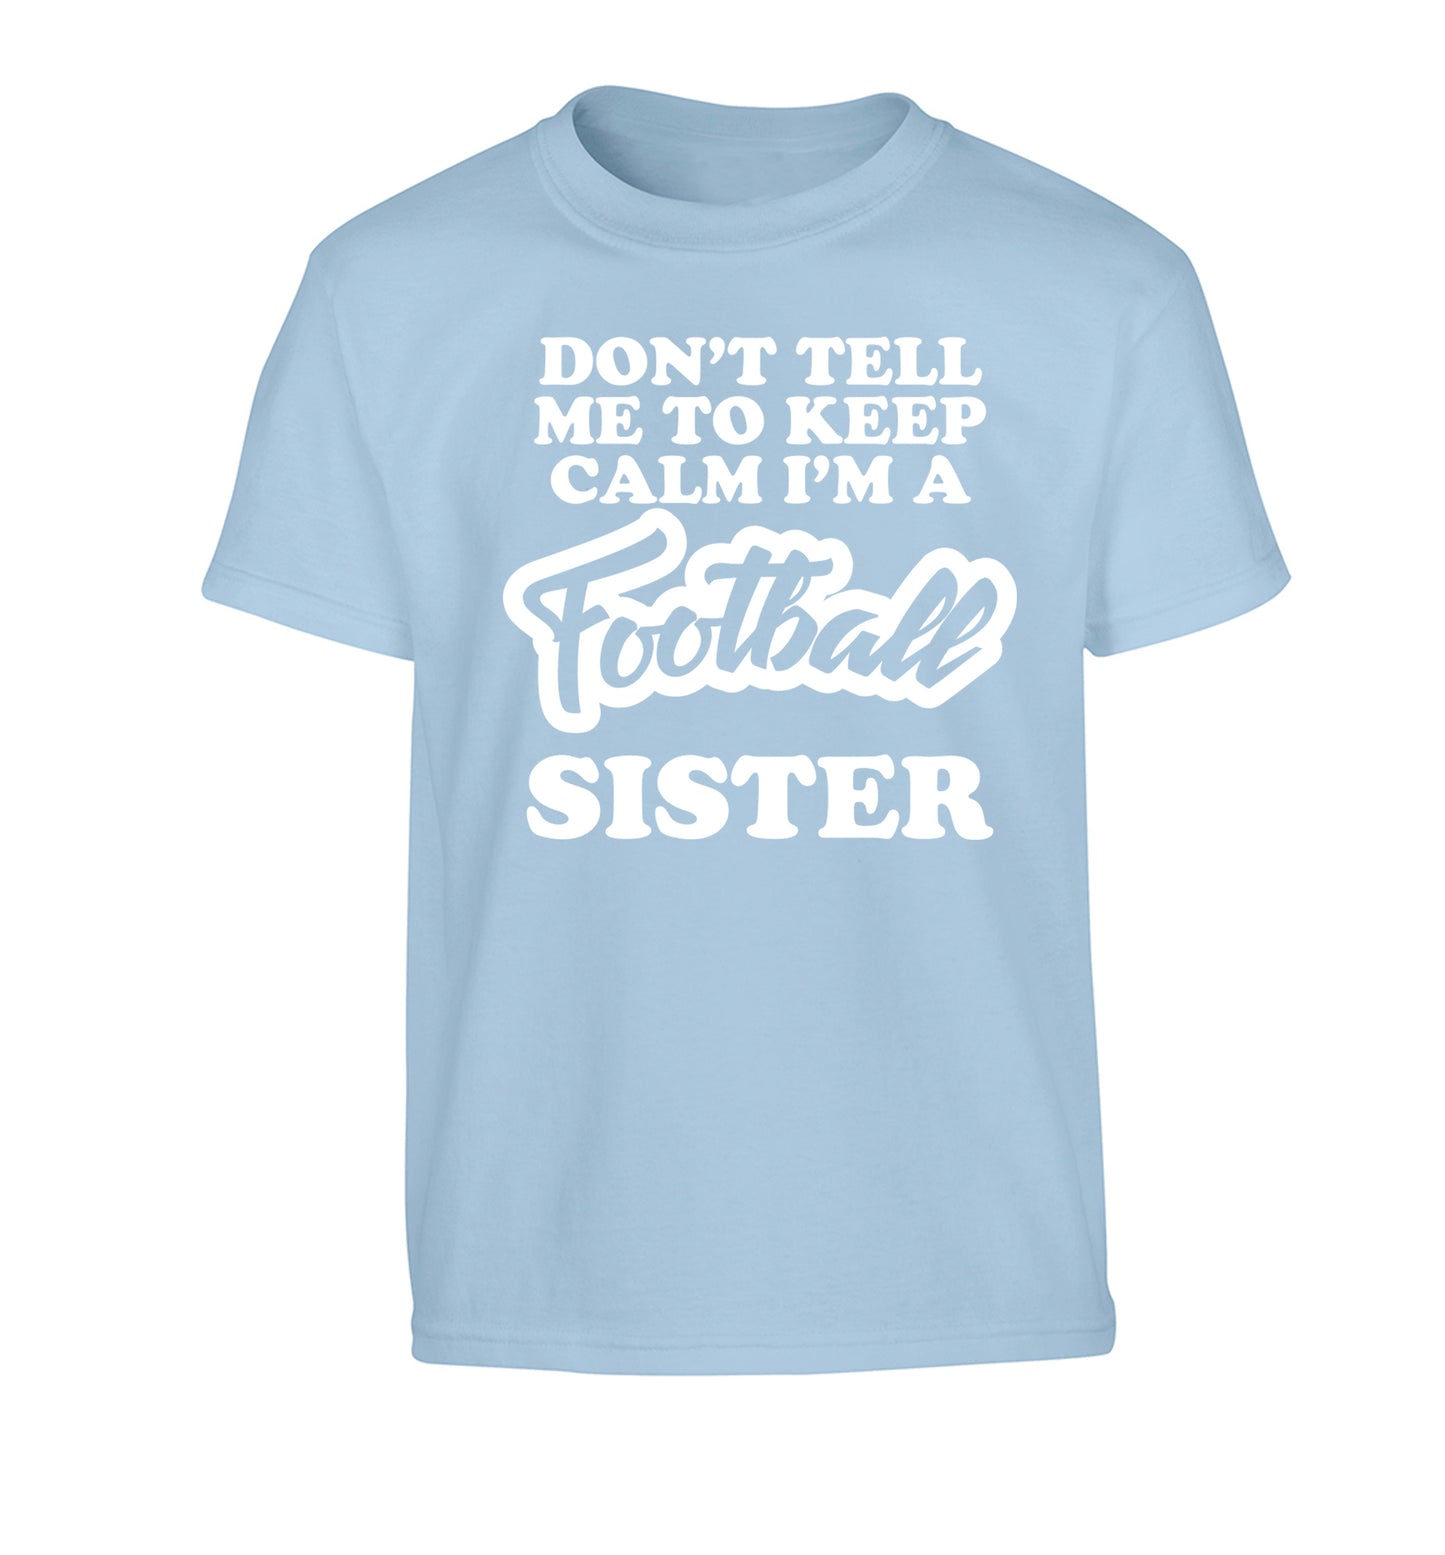 Don't tell me to keep calm I'm a football sister Children's light blue Tshirt 12-14 Years